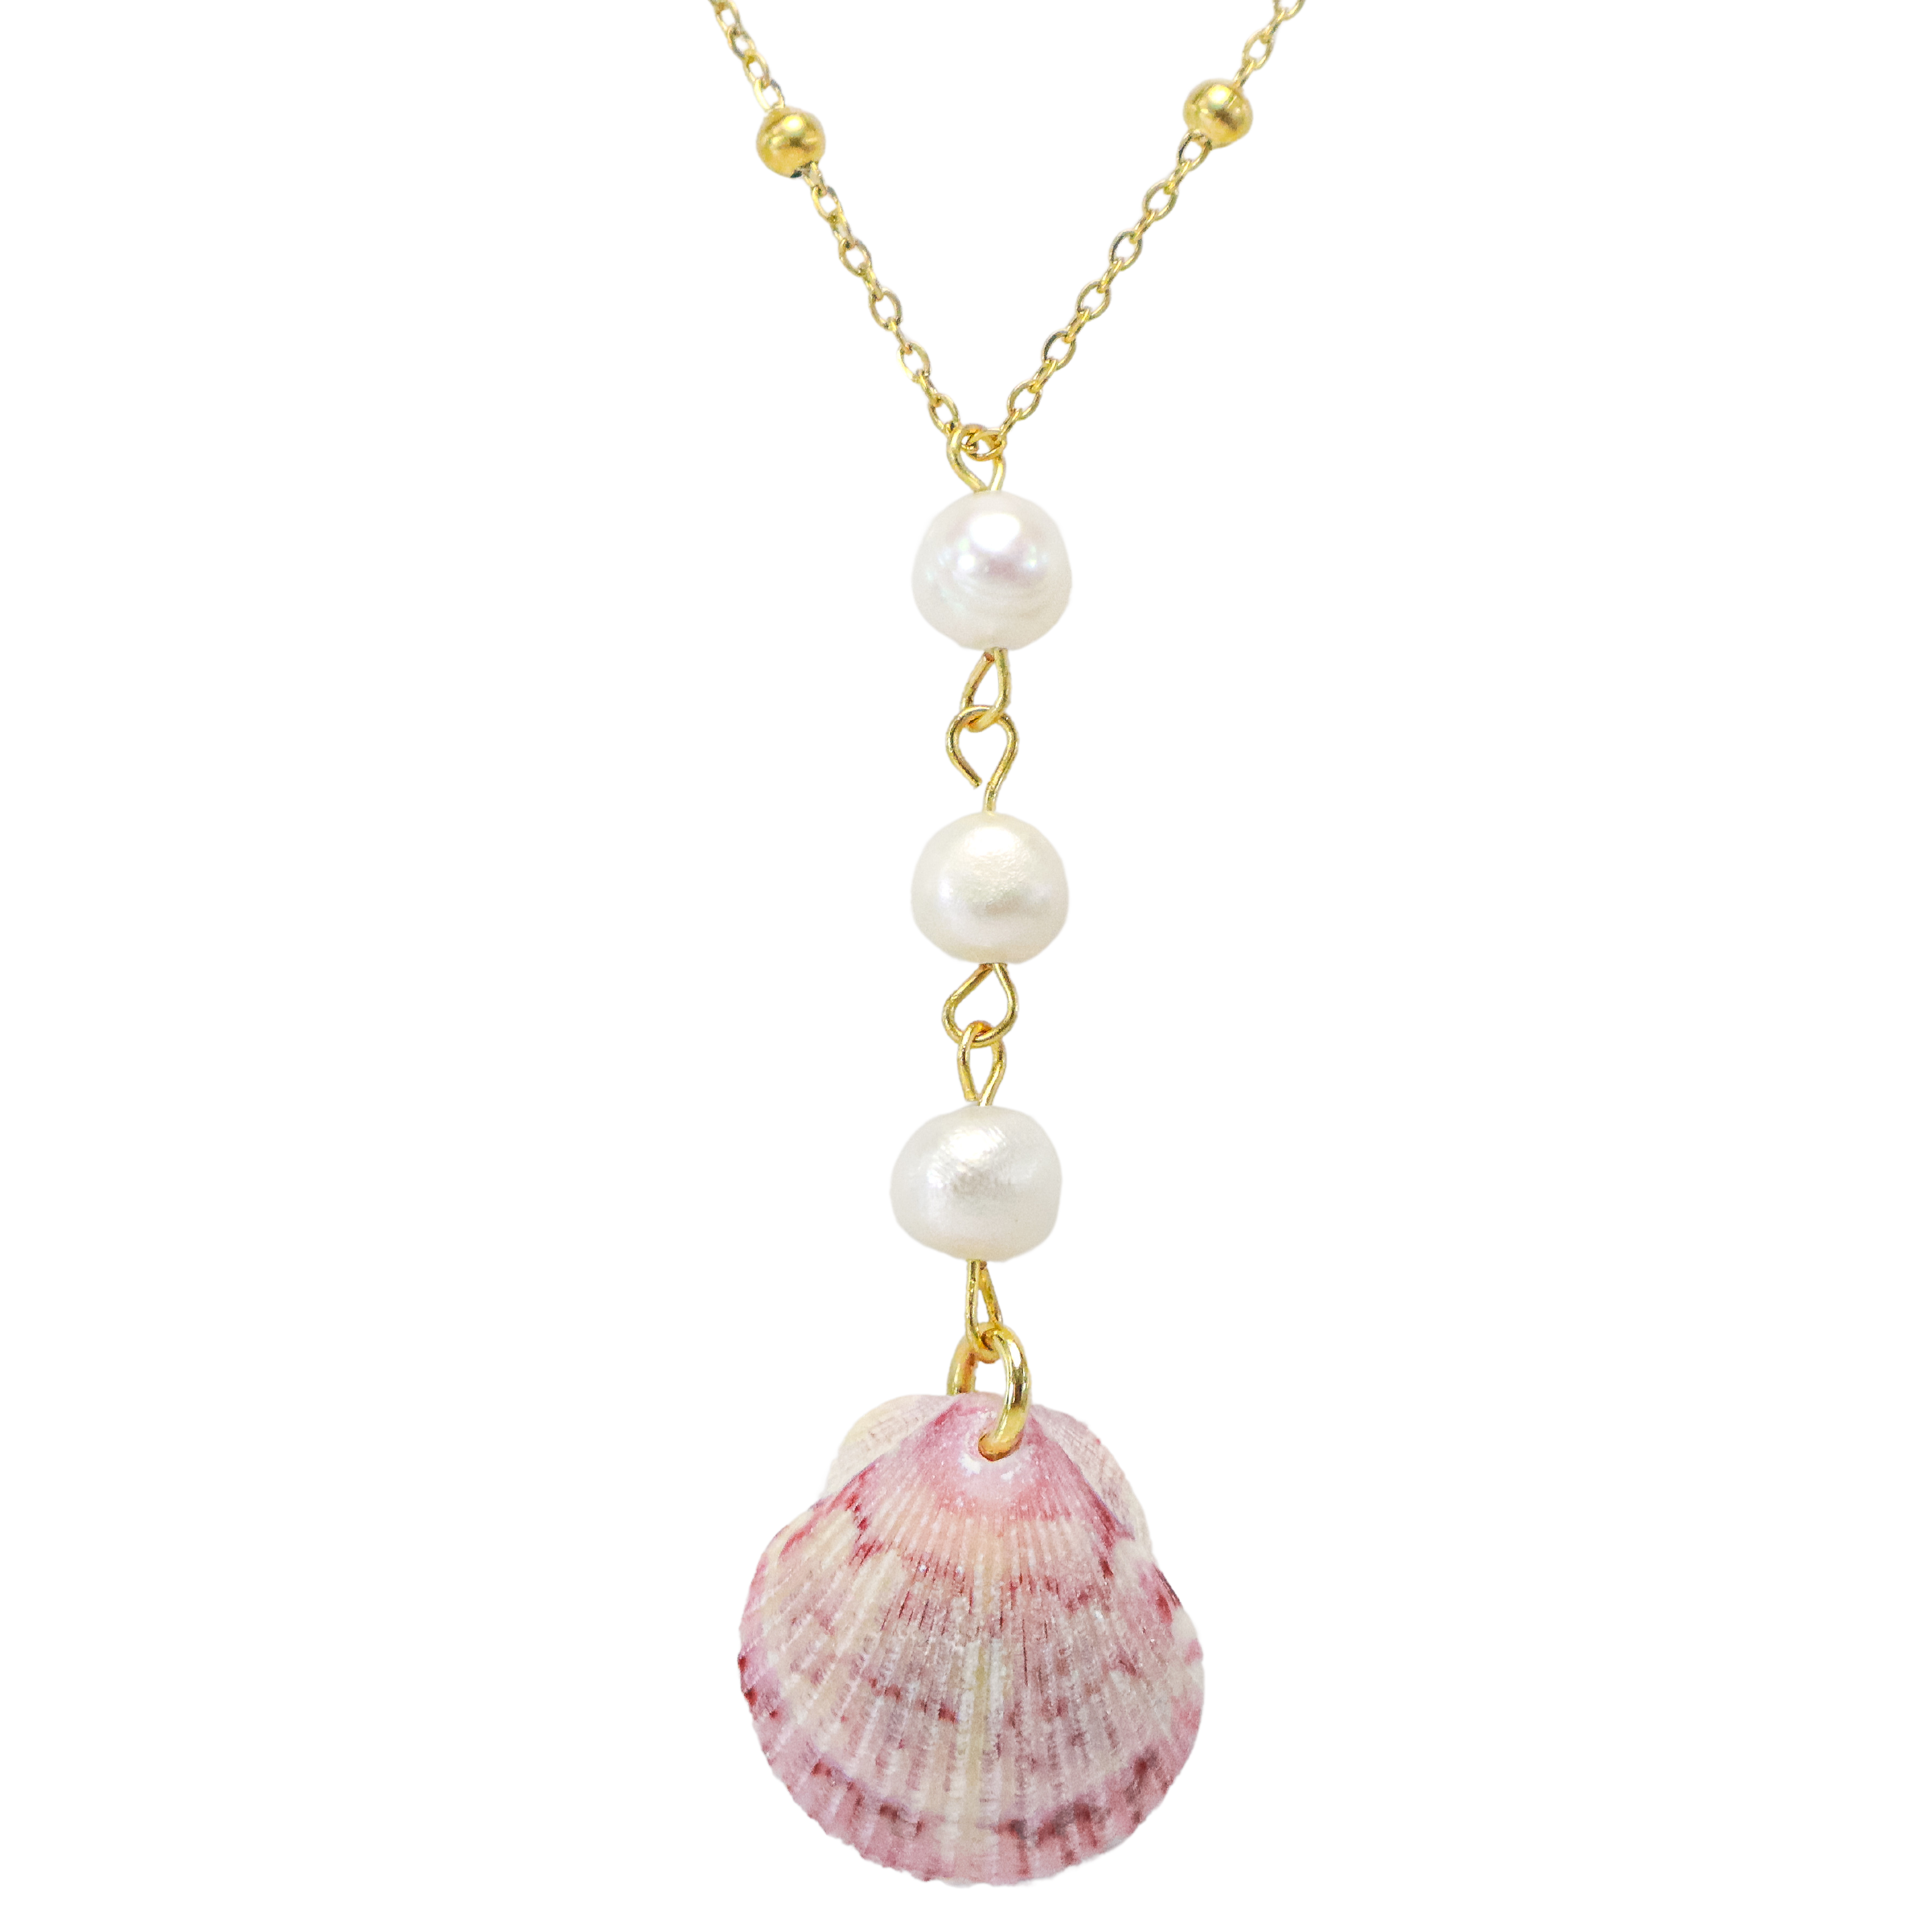 Lauren’s Pearl & Scallop Shell Lariat Necklace